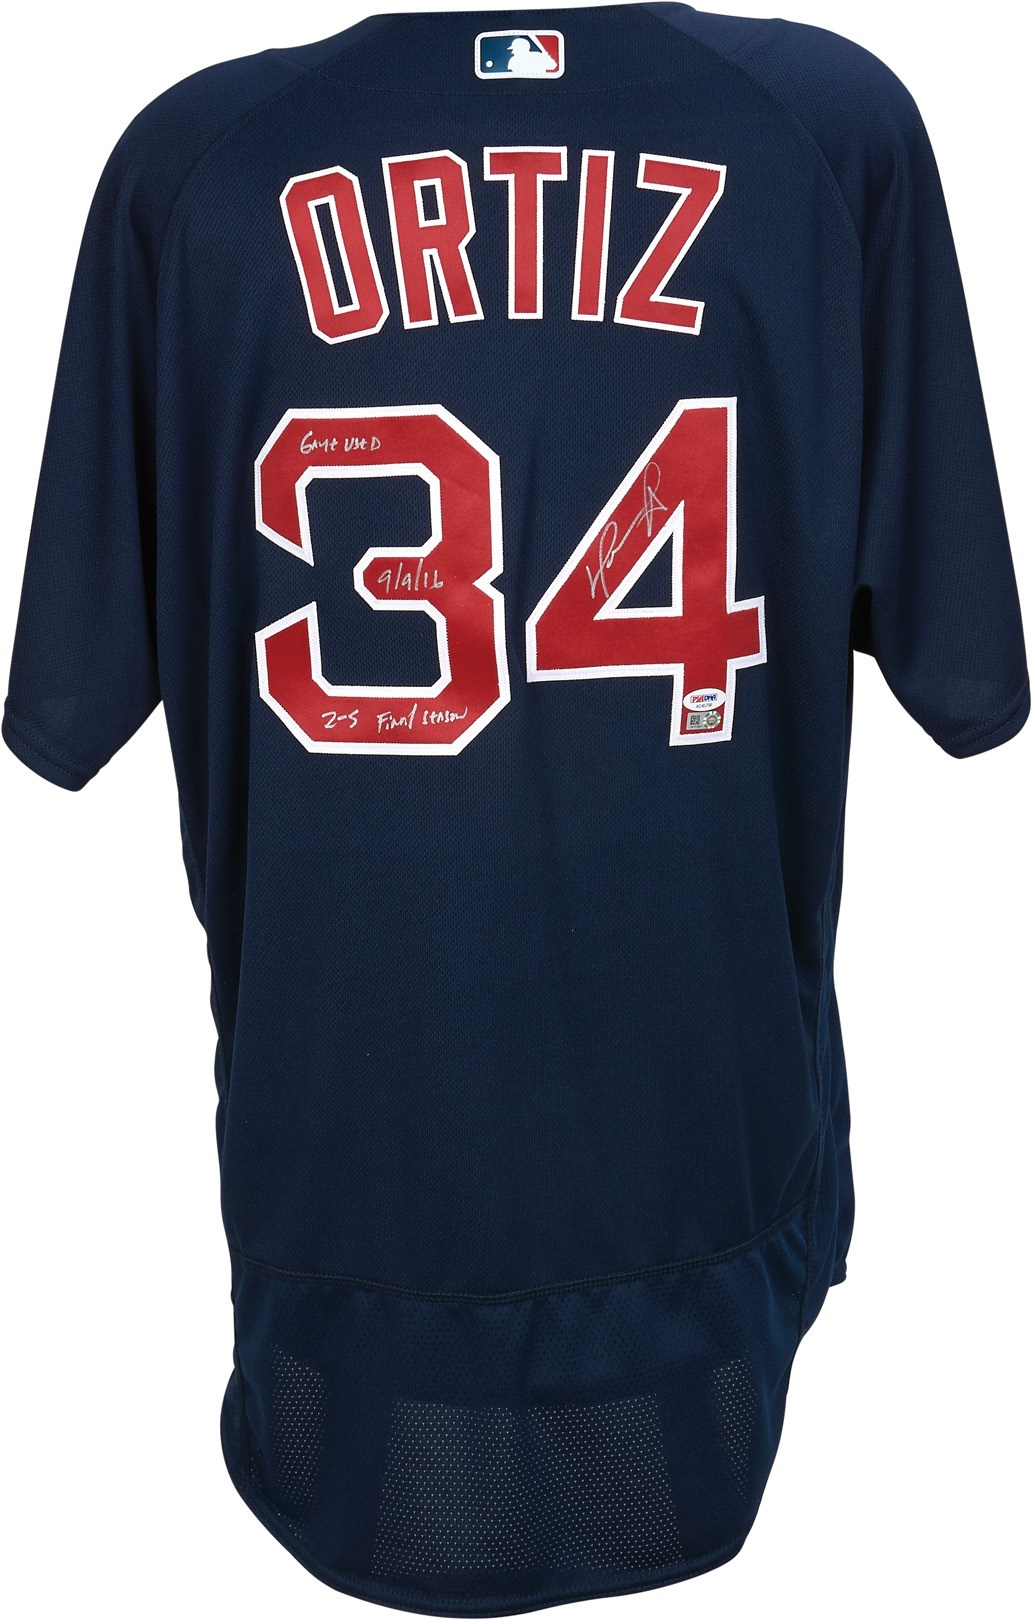 Boston Sports - 9/9/16 David Ortiz Signed Game Worn Red Sox Jersey - Final Season (MLB Auth. & Photo-Matched)